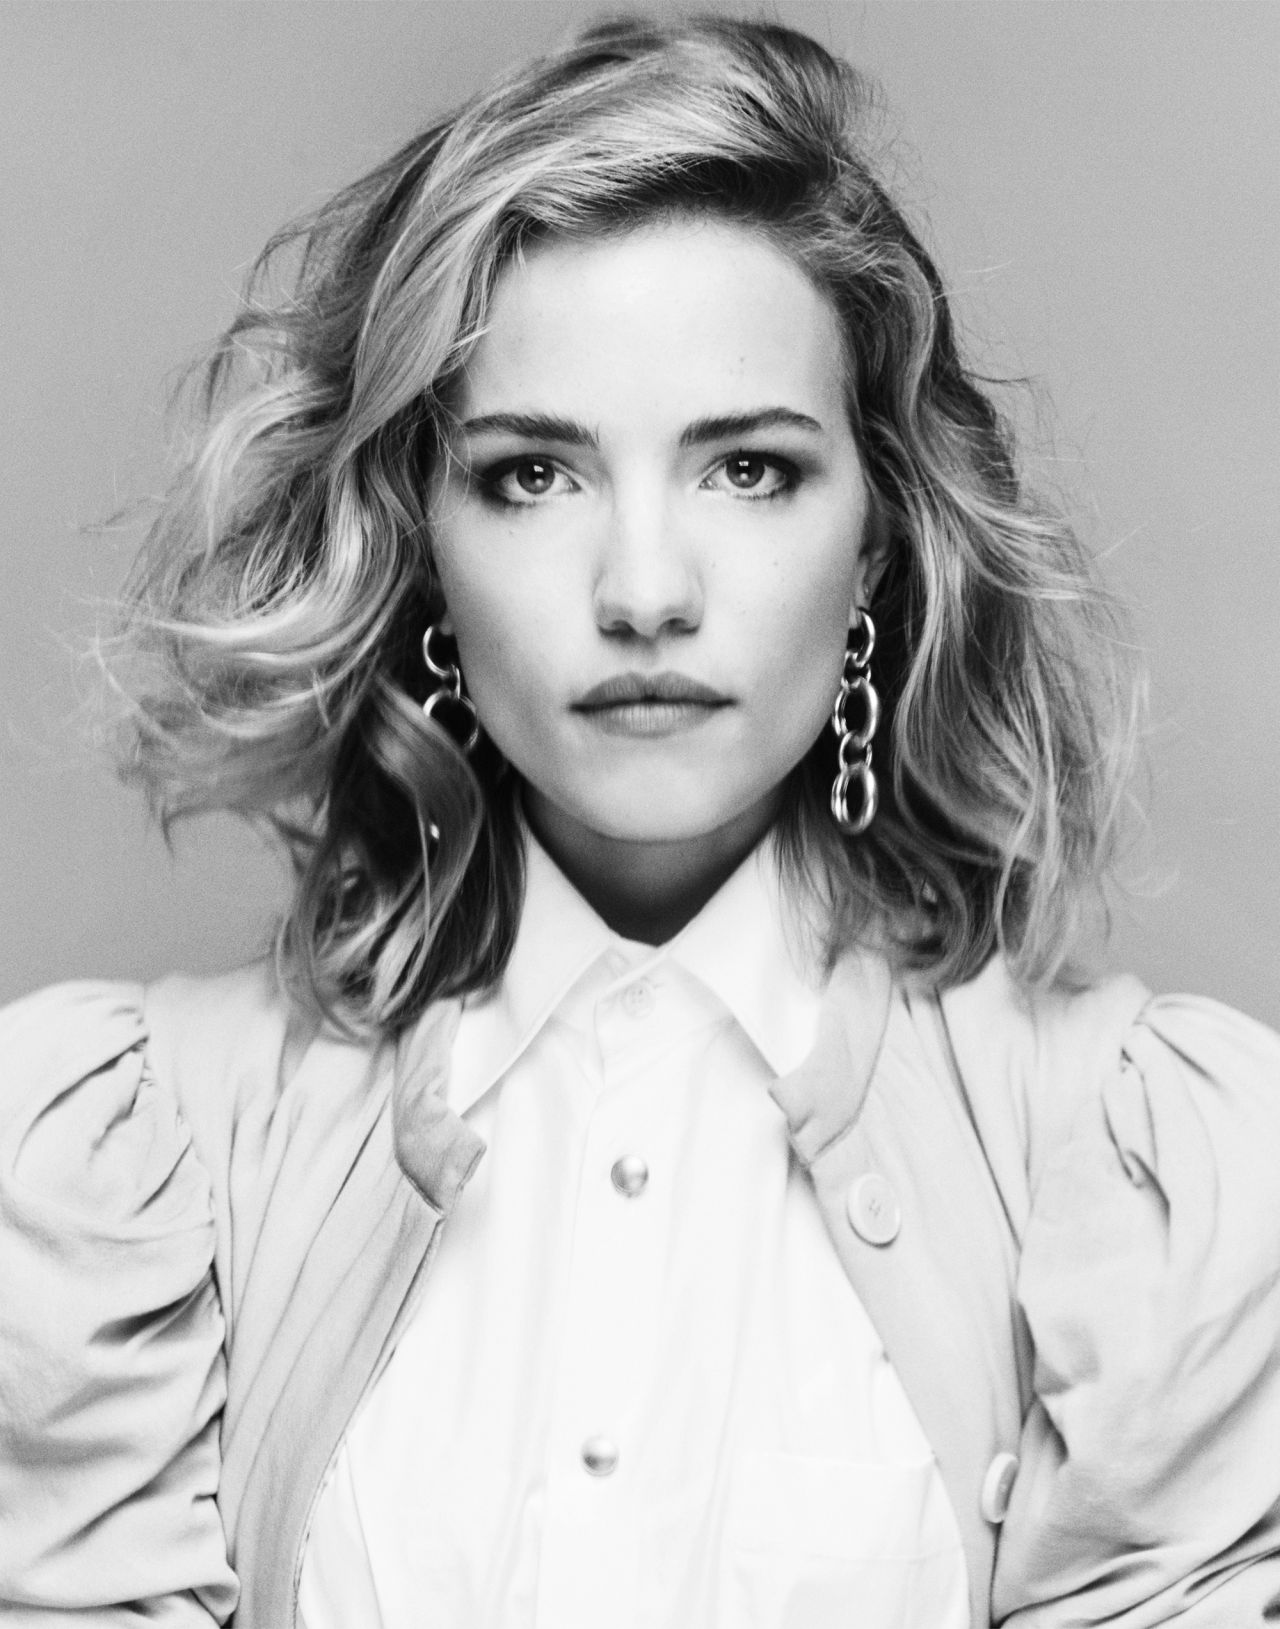 Willa Fitzgerald - Photoshoot for SBJCT Journal February 2020.